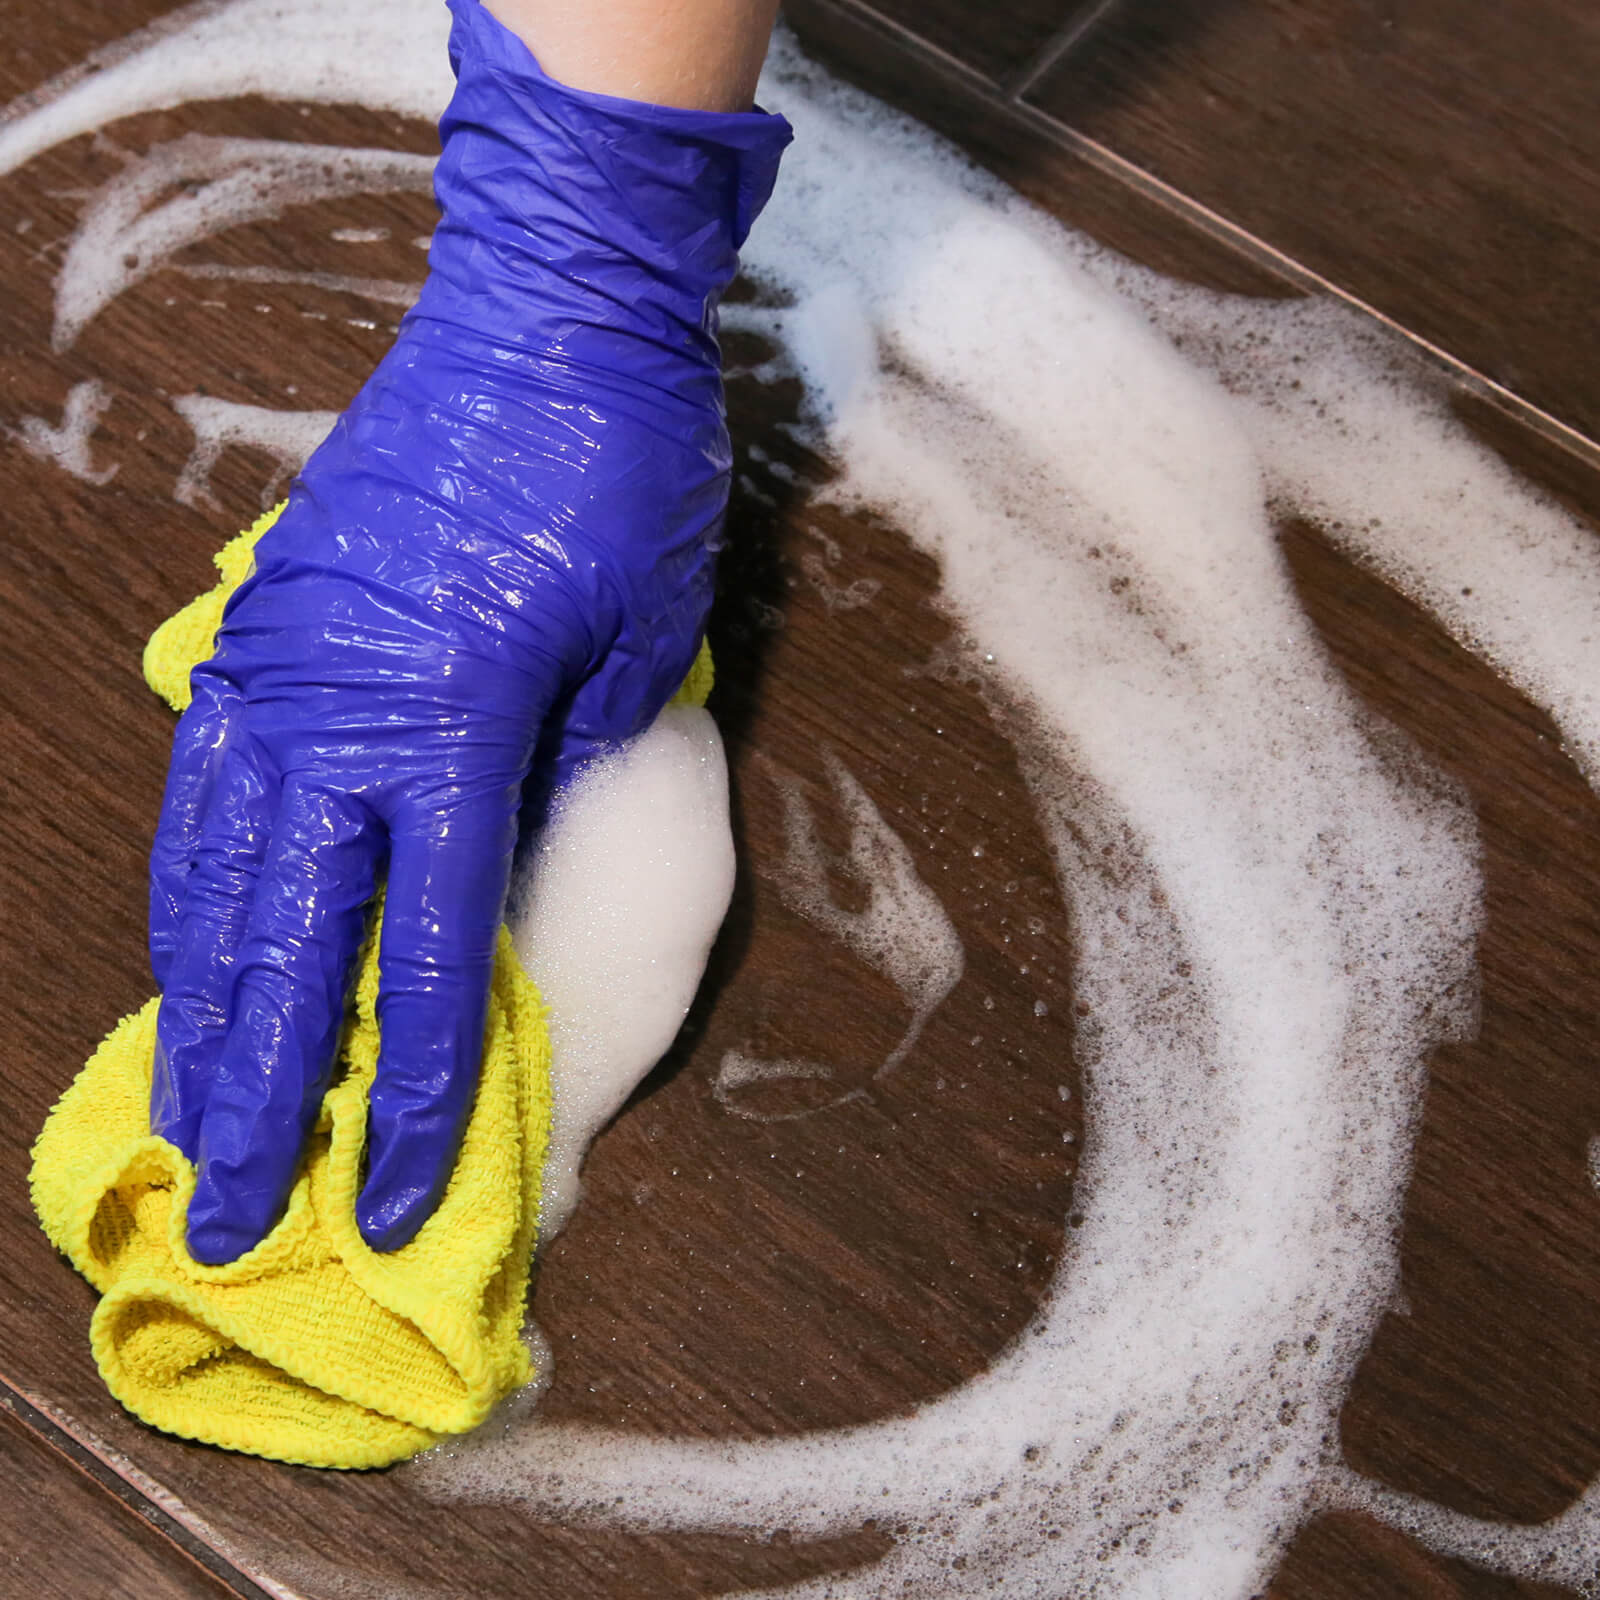 Tile Cleaning with hands | BMG Flooring & Tile Center